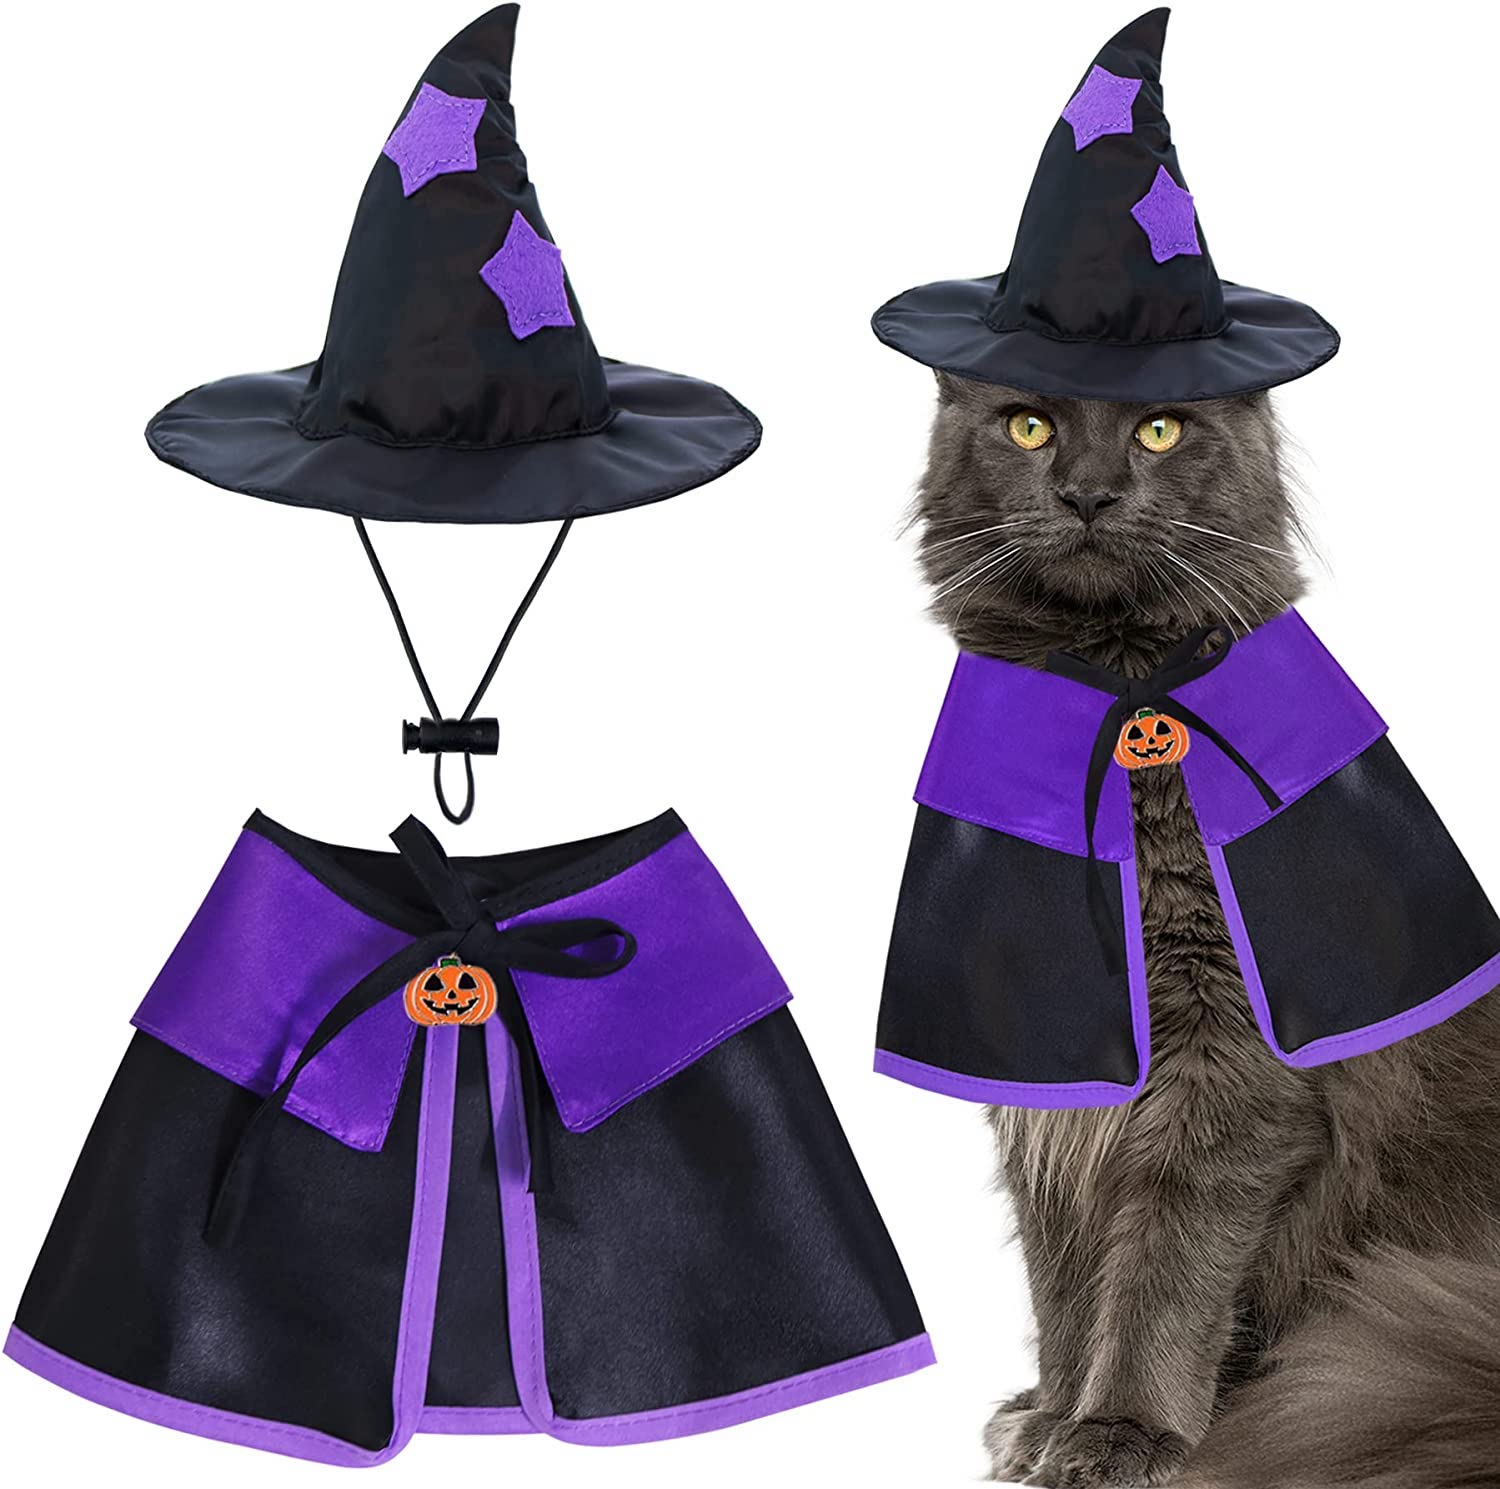 Witch costume for cat